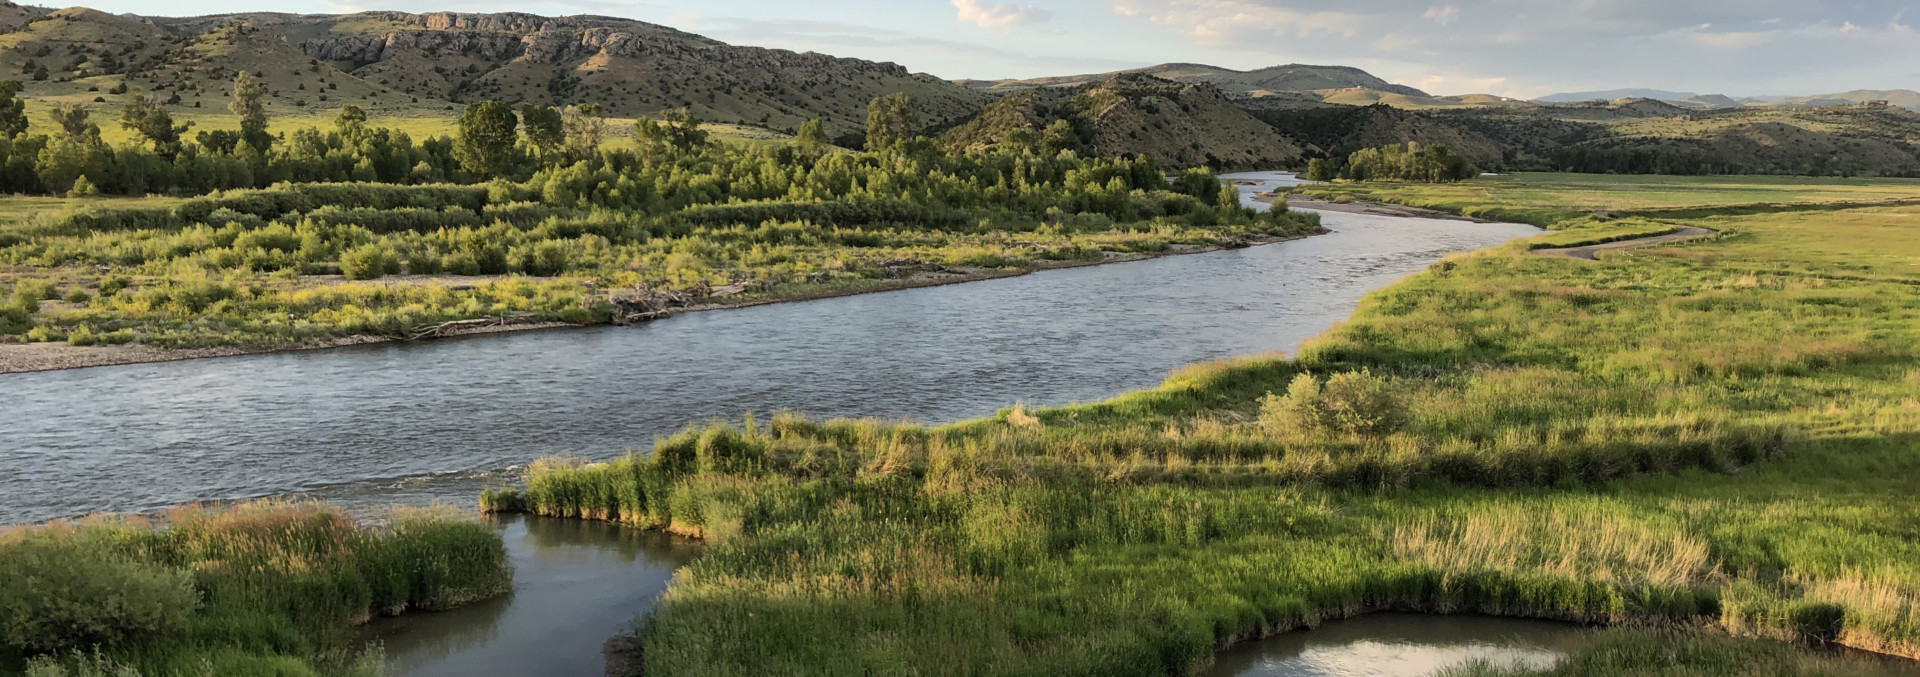 montana fishing property for sale f double d ranch